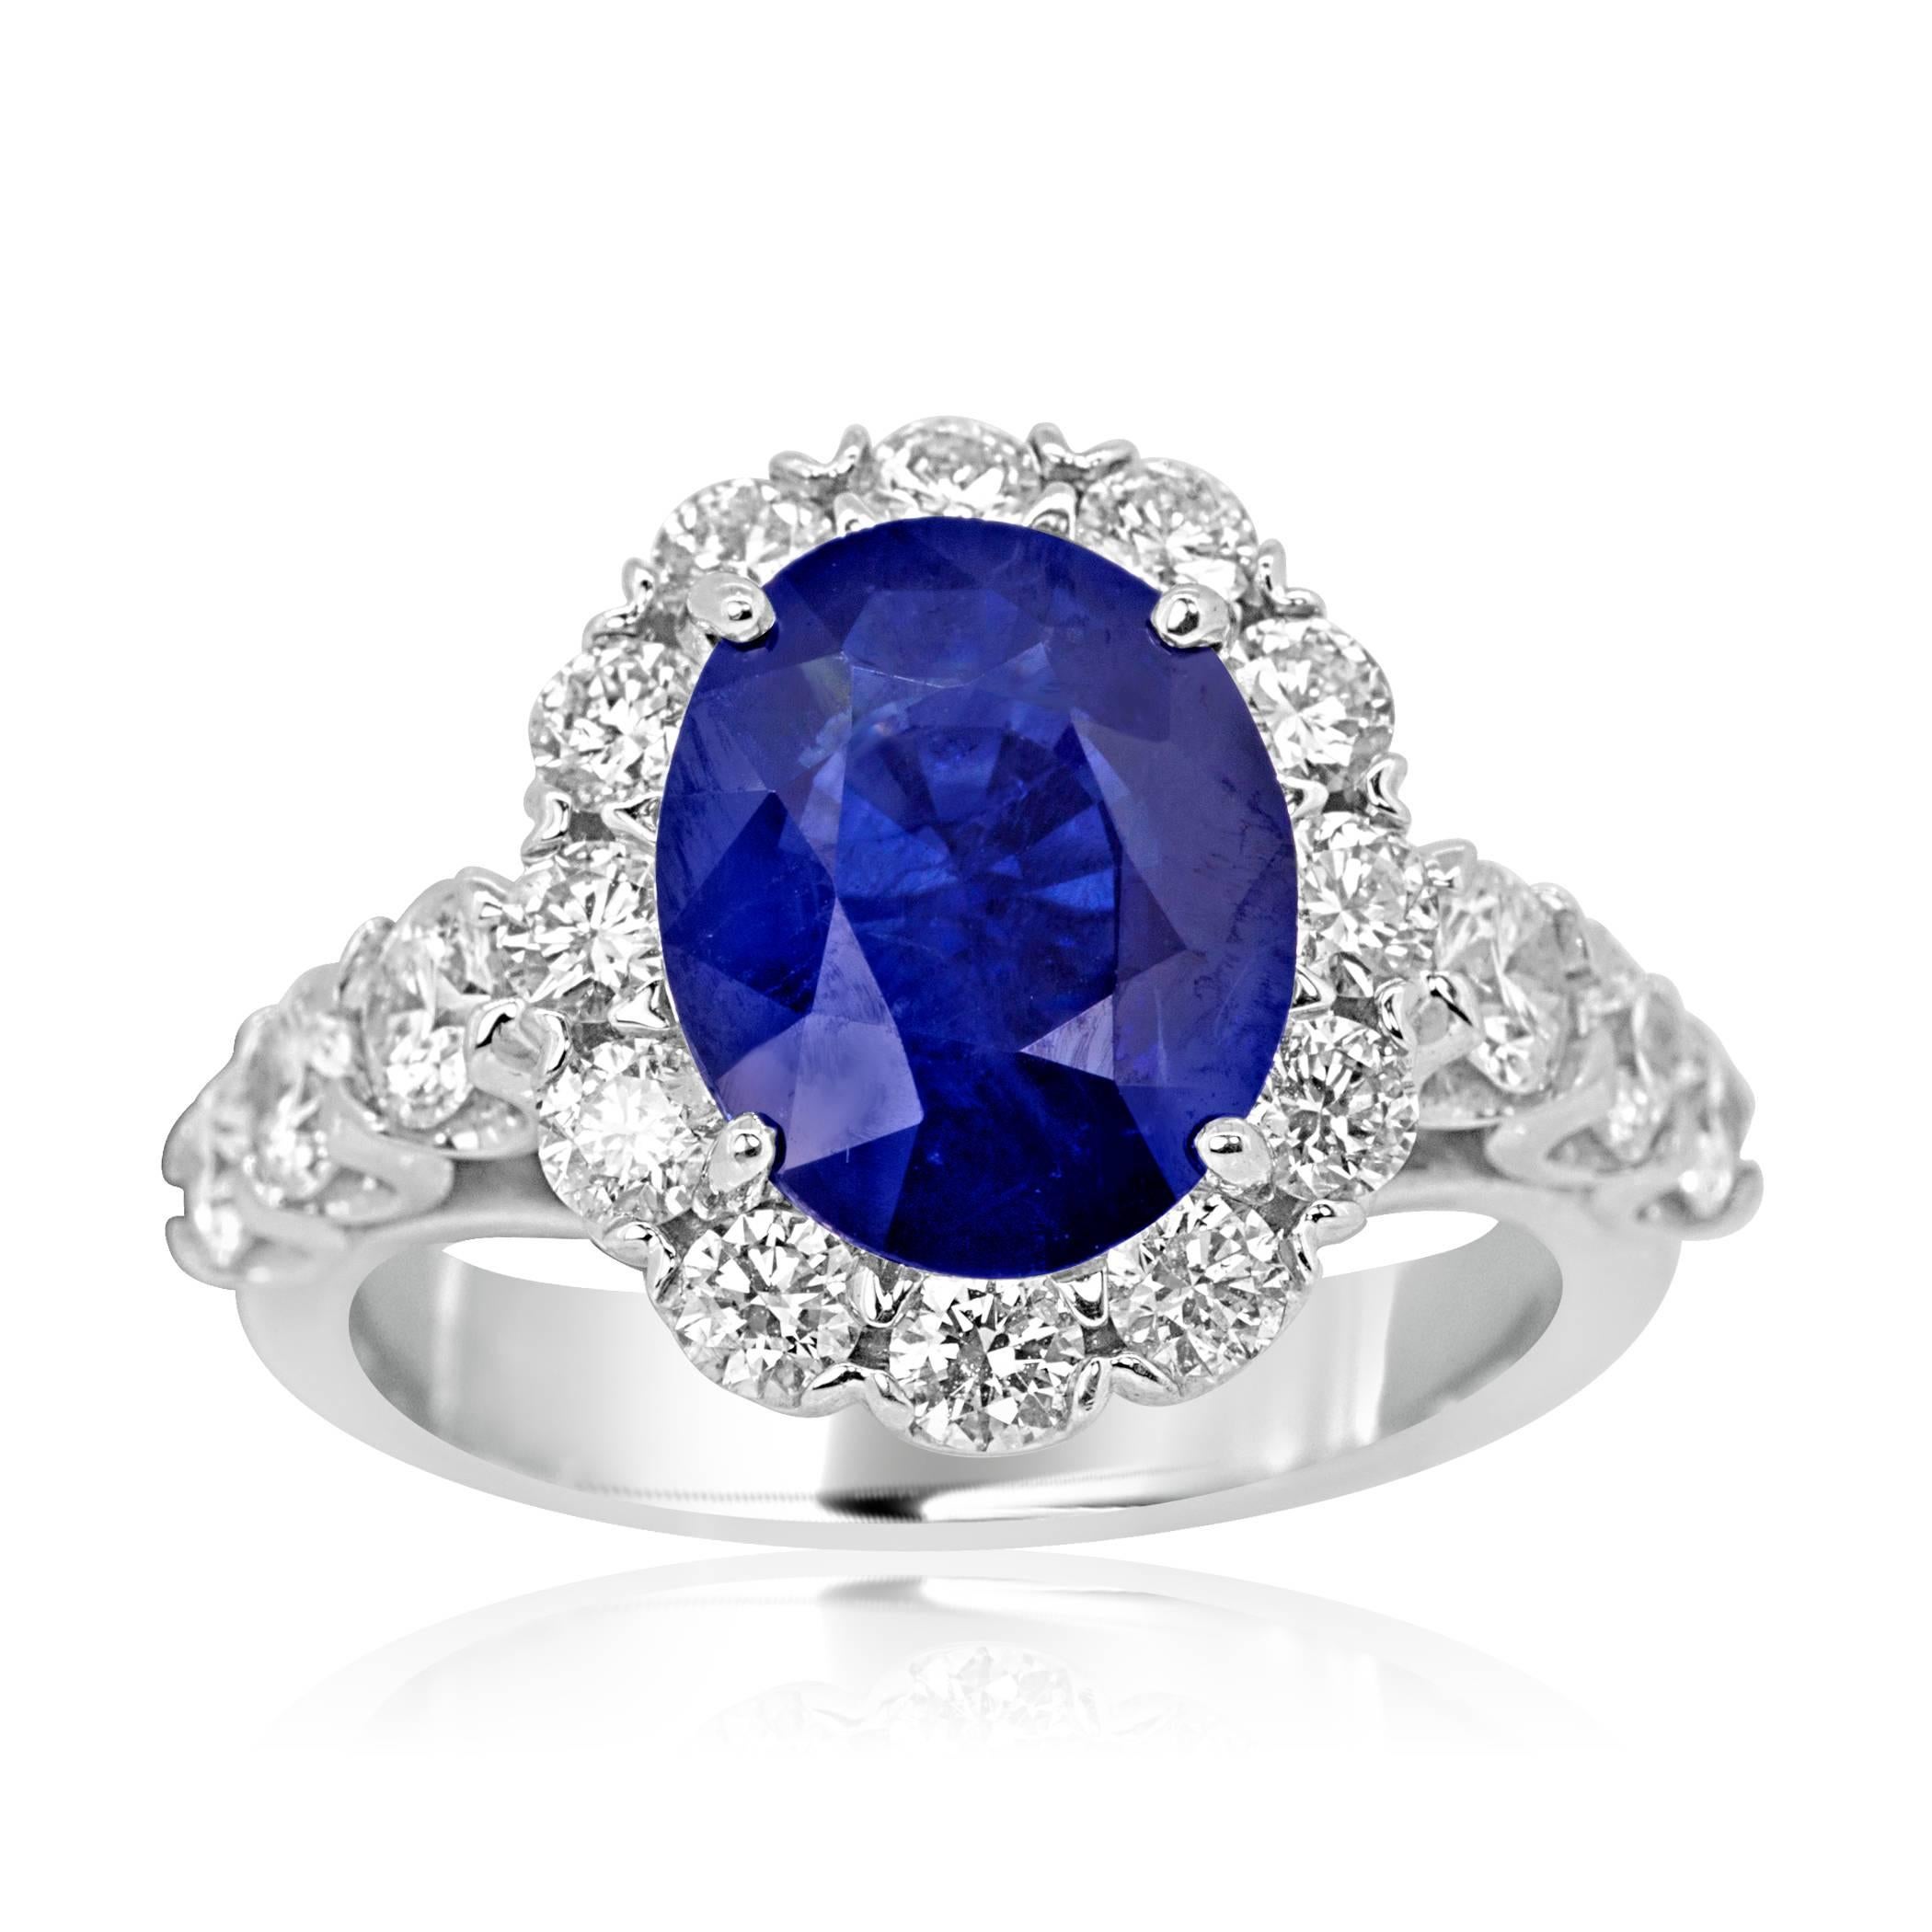 GIA Certified Stunning Blue Sapphire Oval 3.81 Carat Encircled in a Halo of White G-H Color VS-SI Diamond 1.45 Carat in 18K White Gold Bridal Fashion Cocktail Ring. 

Style available in different price ranges. Prices are based on your selection of